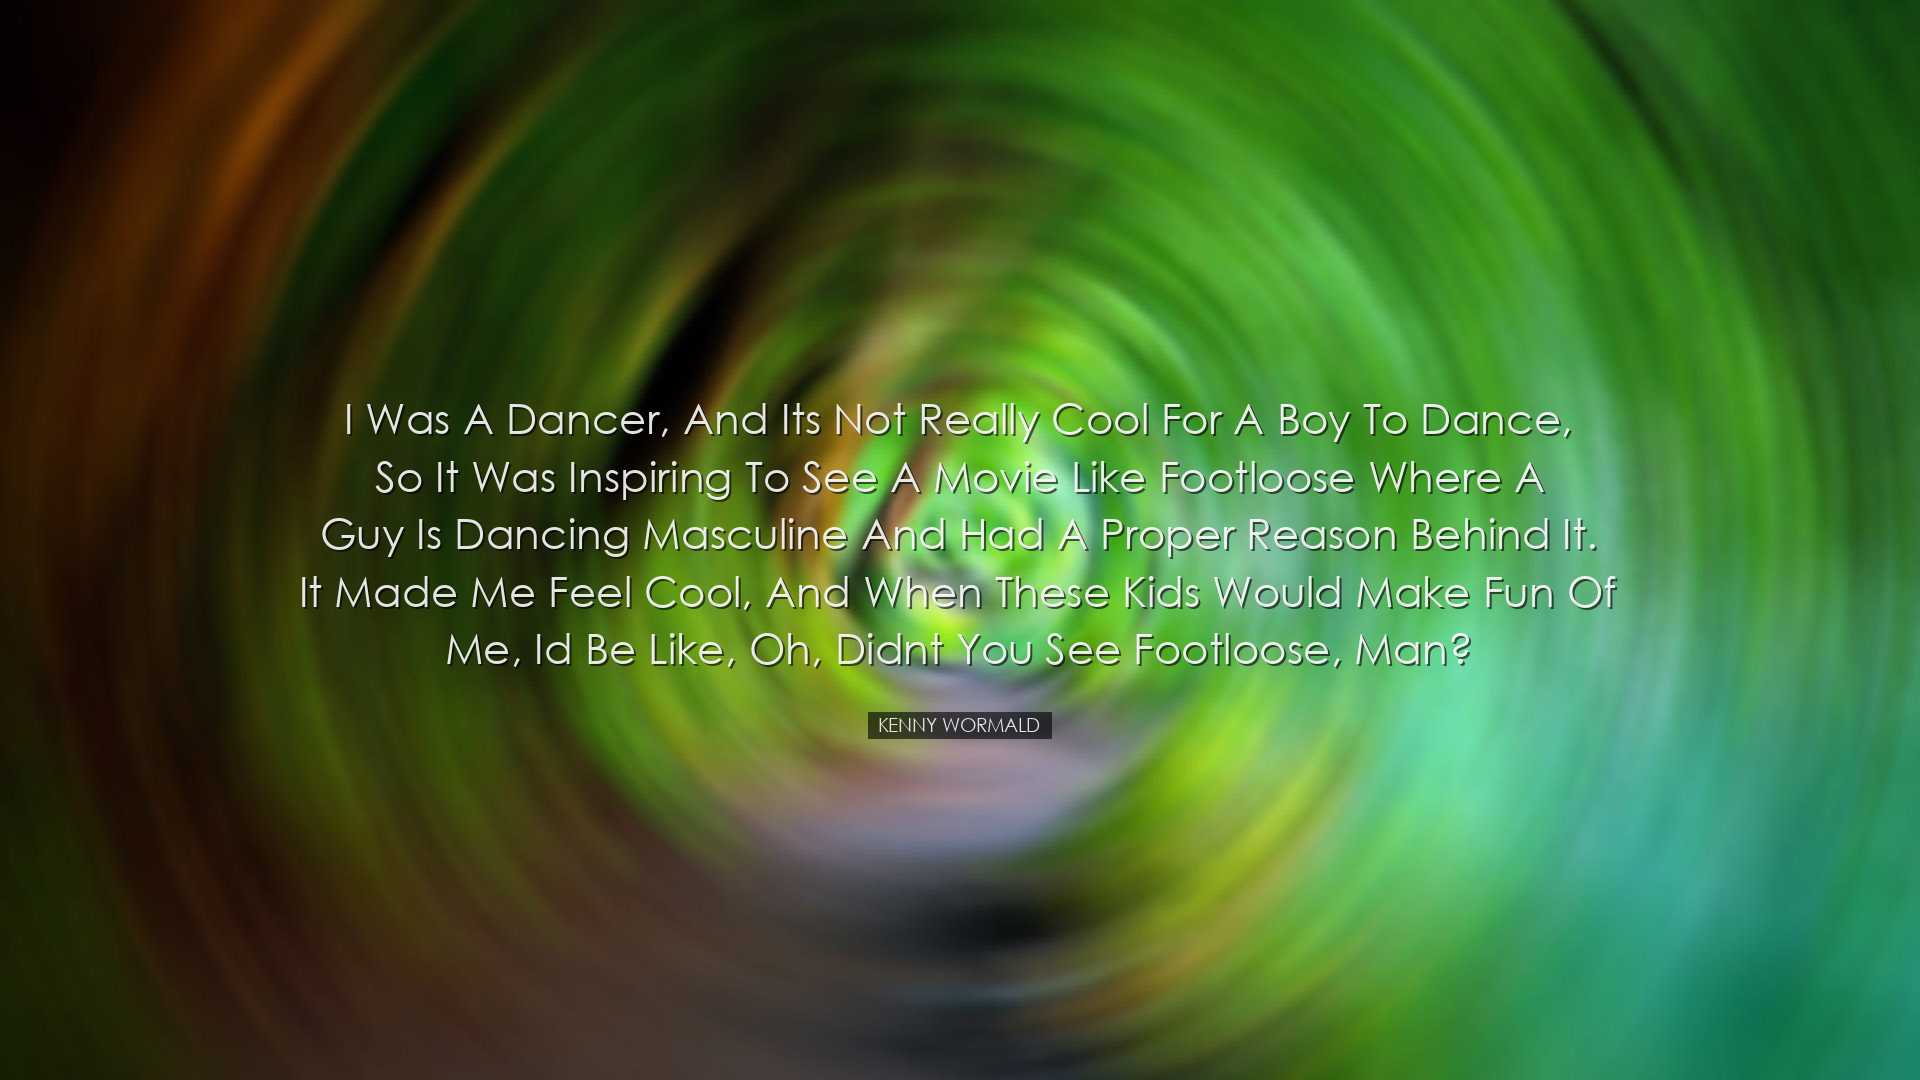 I was a dancer, and its not really cool for a boy to dance, so it